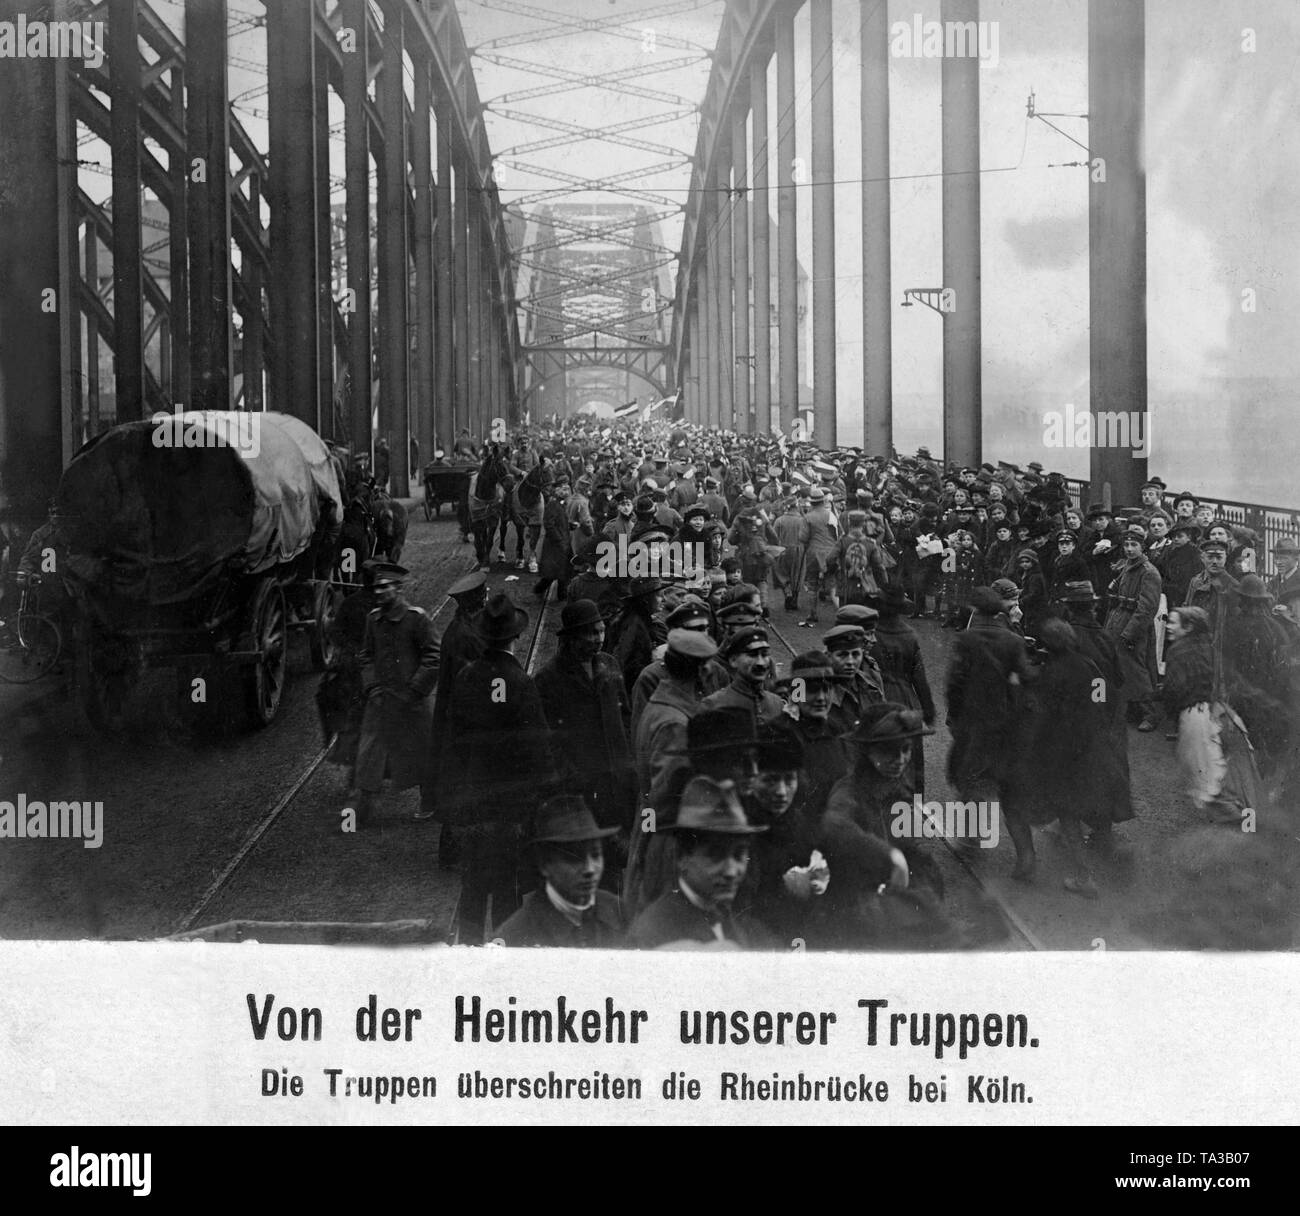 Returning soldiers are greeted by civilians on the bridge over the Rhine in Cologne. After the armistice agreement of Compiegne, the Left of Rhine region became a demilitarized zone. Stock Photo